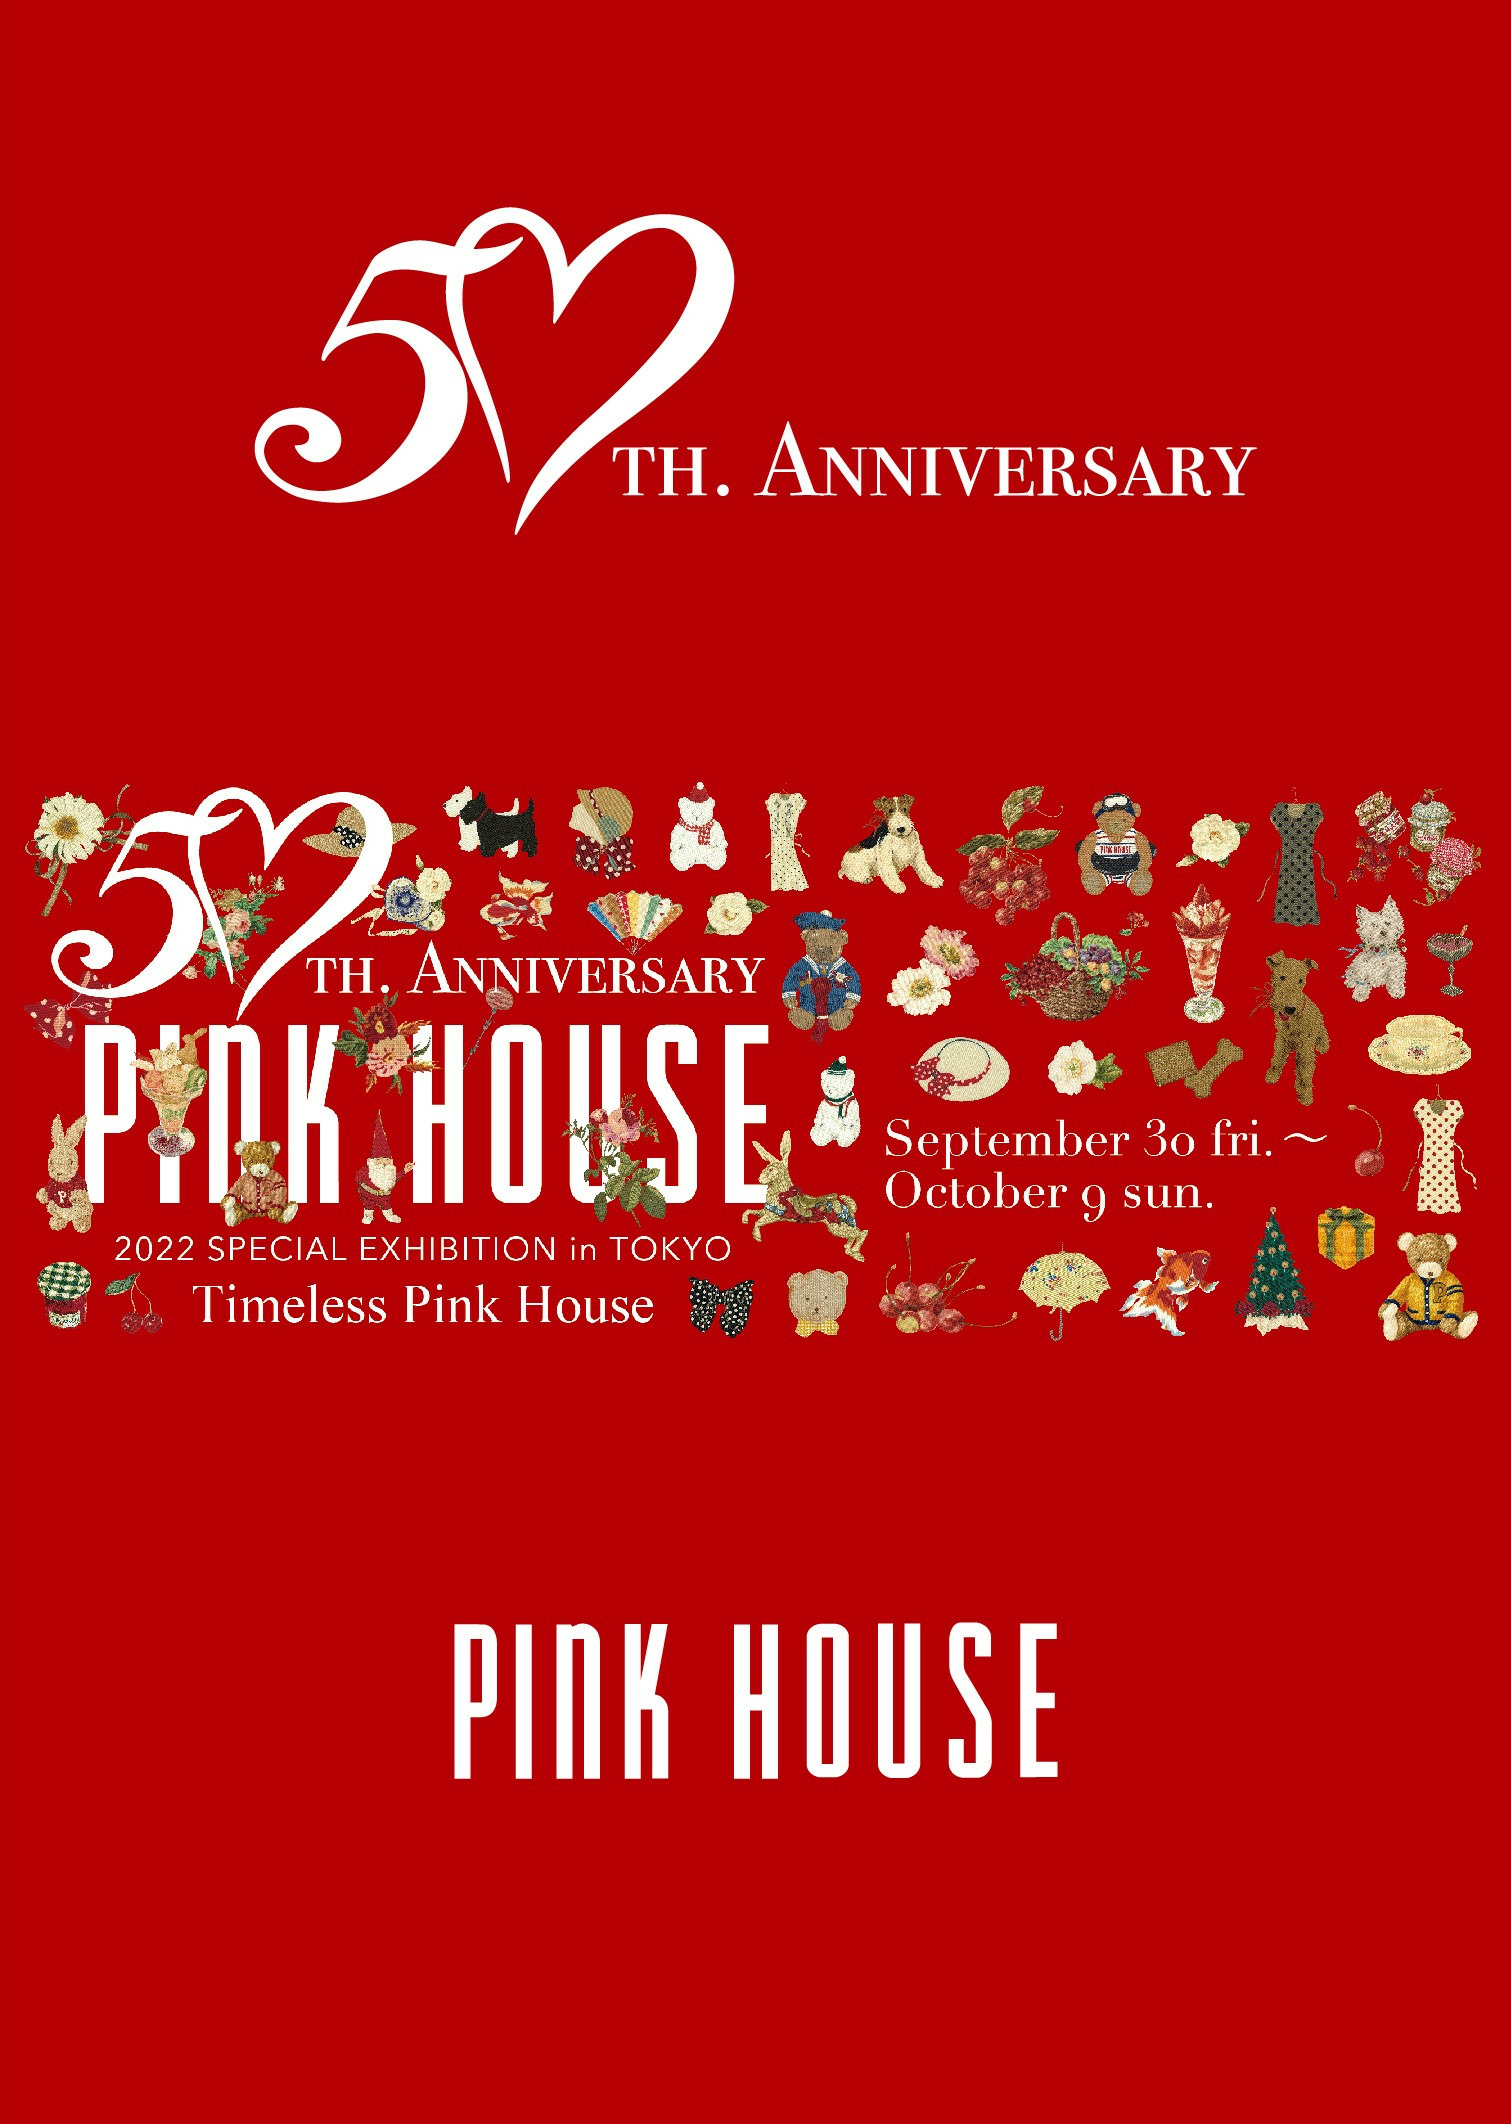 PINK HOUSE 50th.Anniversary 2022 SPECIAL EXHIBITION in TOKYO 